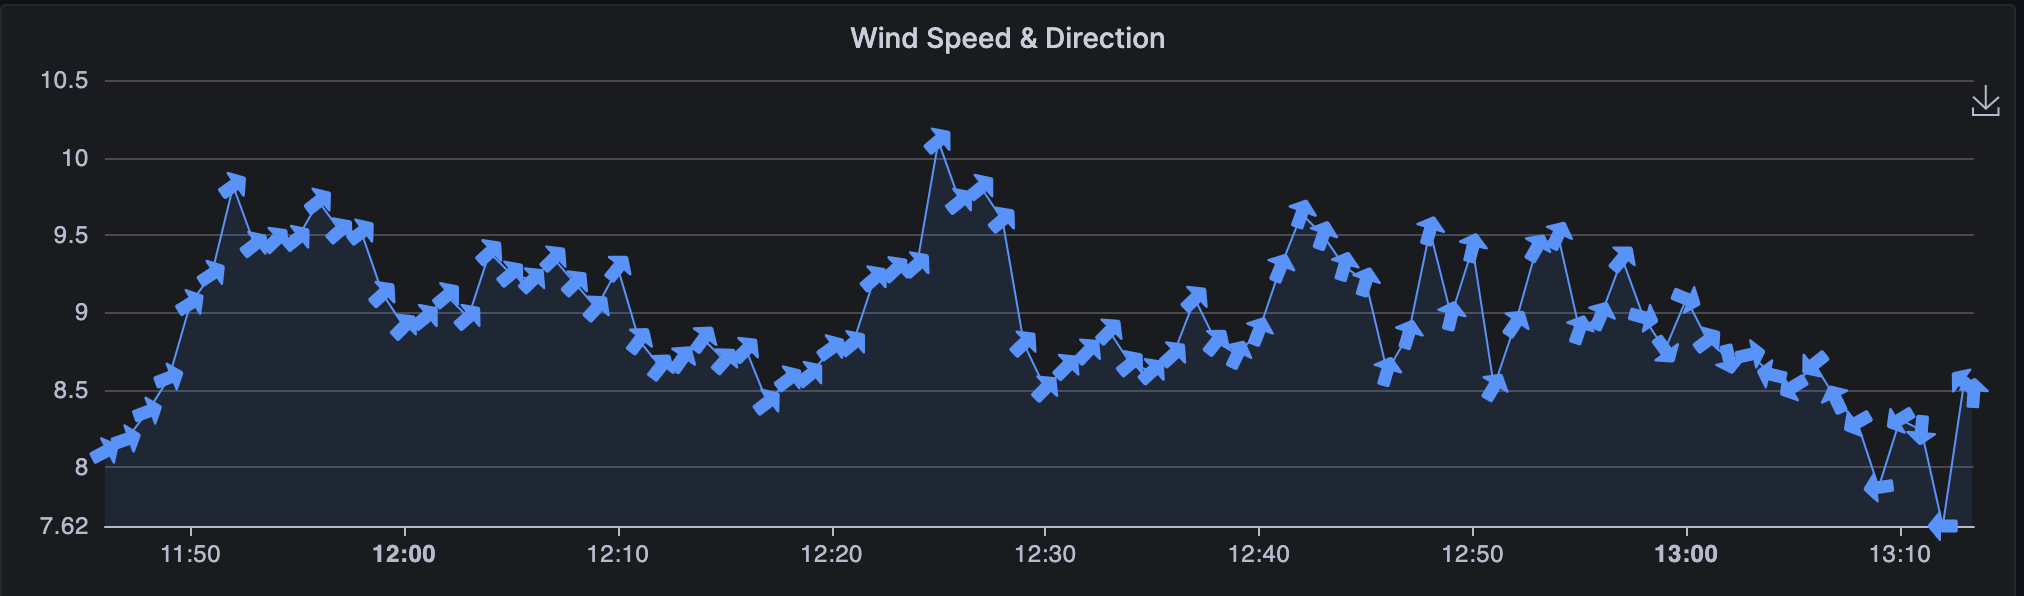 Showing both wind speed & direction on the same chart using Apache ECharts.